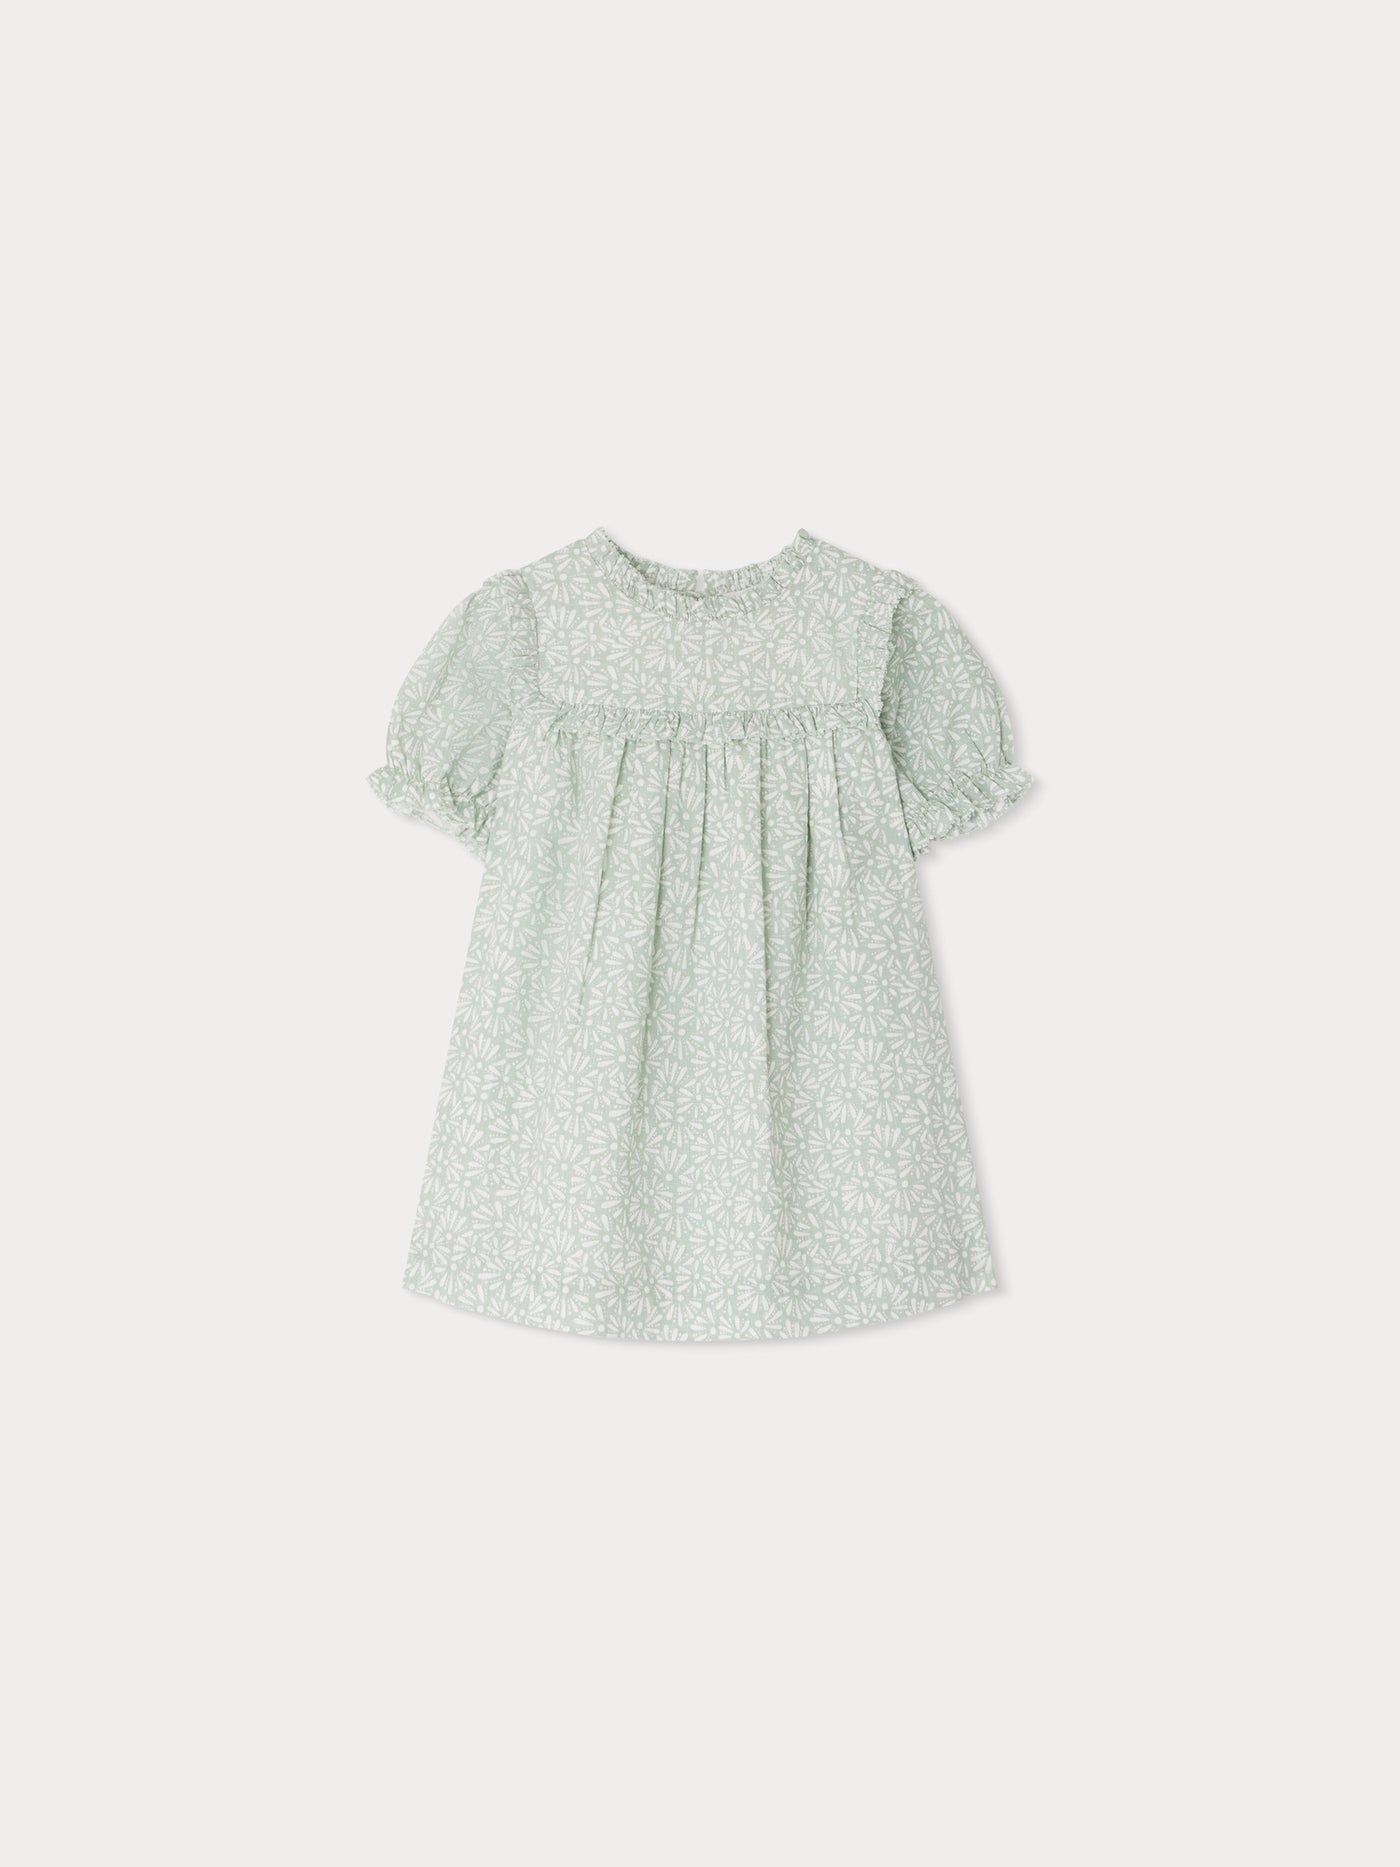 CLEARANCE SALE - DBB Collection - Baby Girls Cream Floral Print Dress